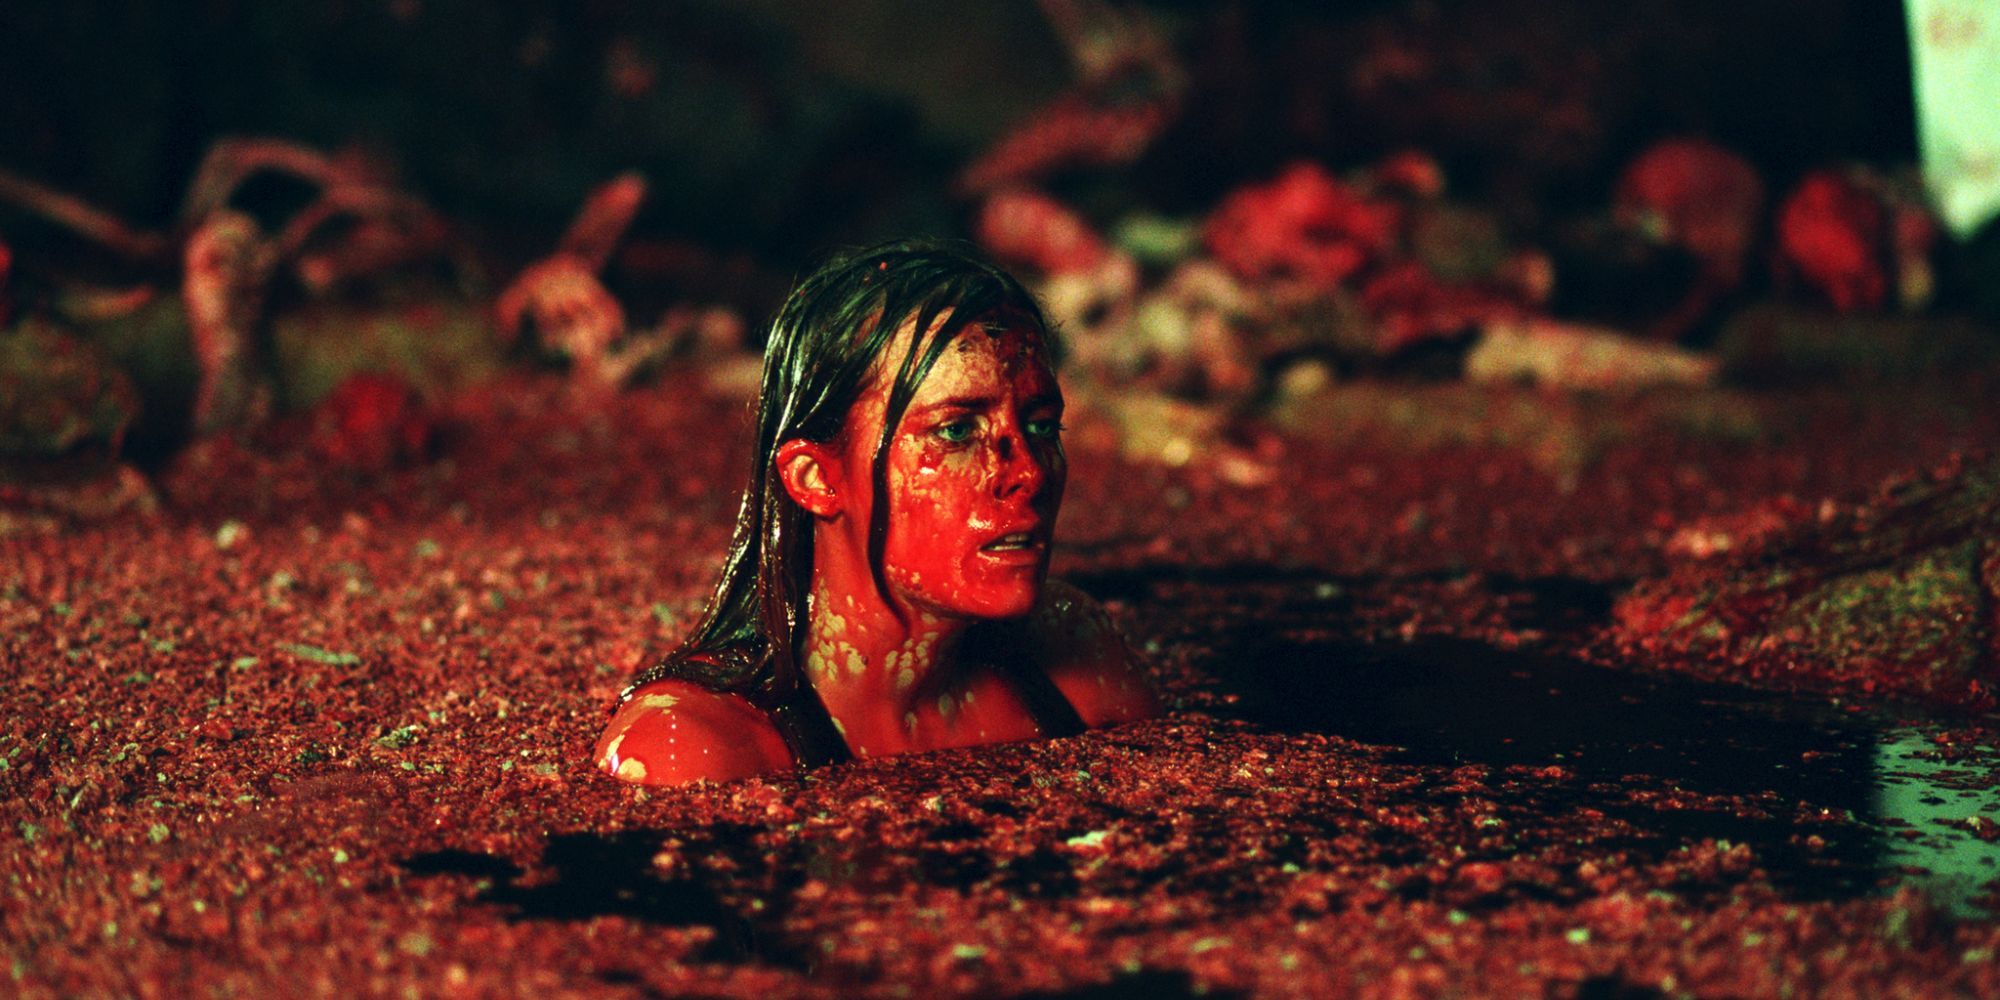 A woma soaked in blood swimming in a pool of human carcasses in The Descent (2005)